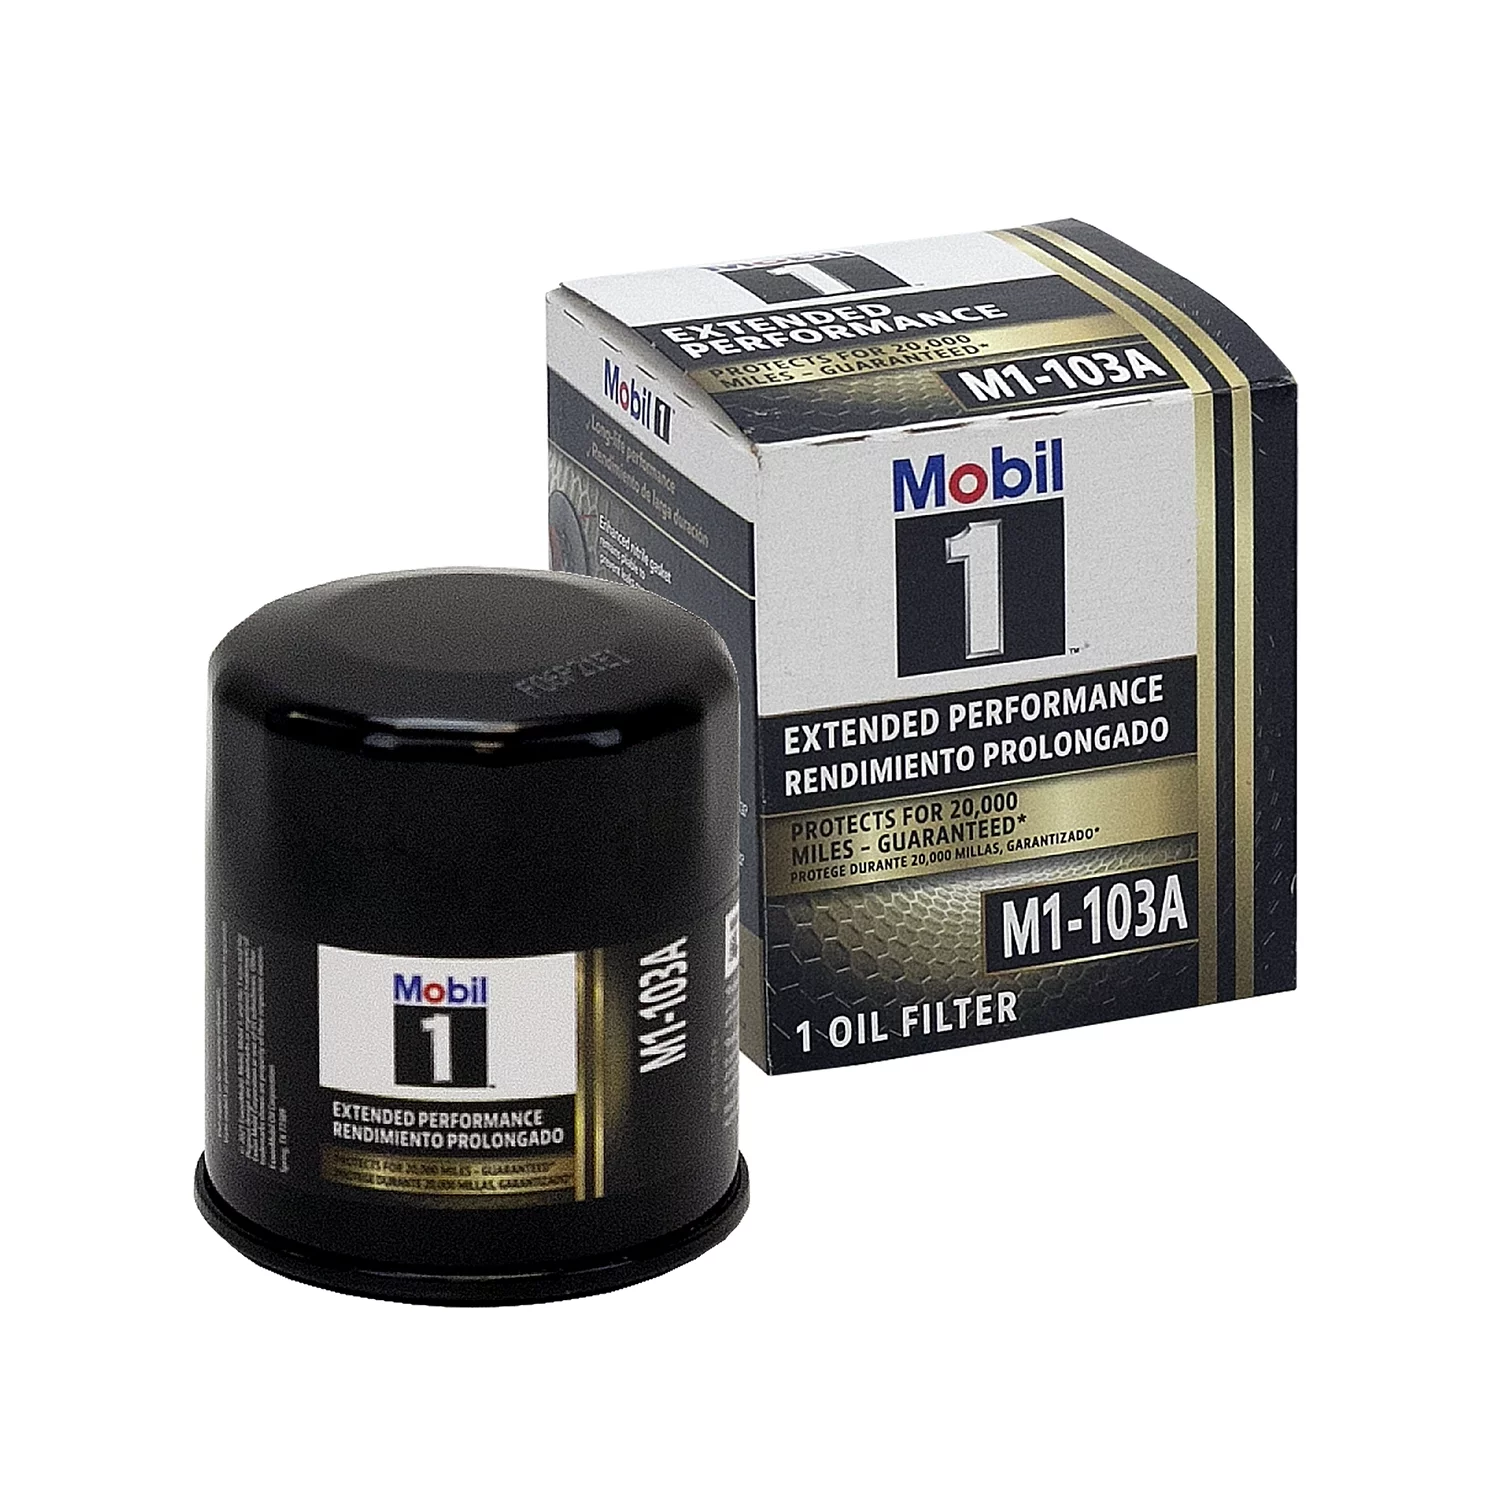 Mobil 1 Extended Performance M1-103A Oil Filter Fits select: 2019-2023 TOYOTA RAV4, 2018-2023 TOYOTA CAMRY